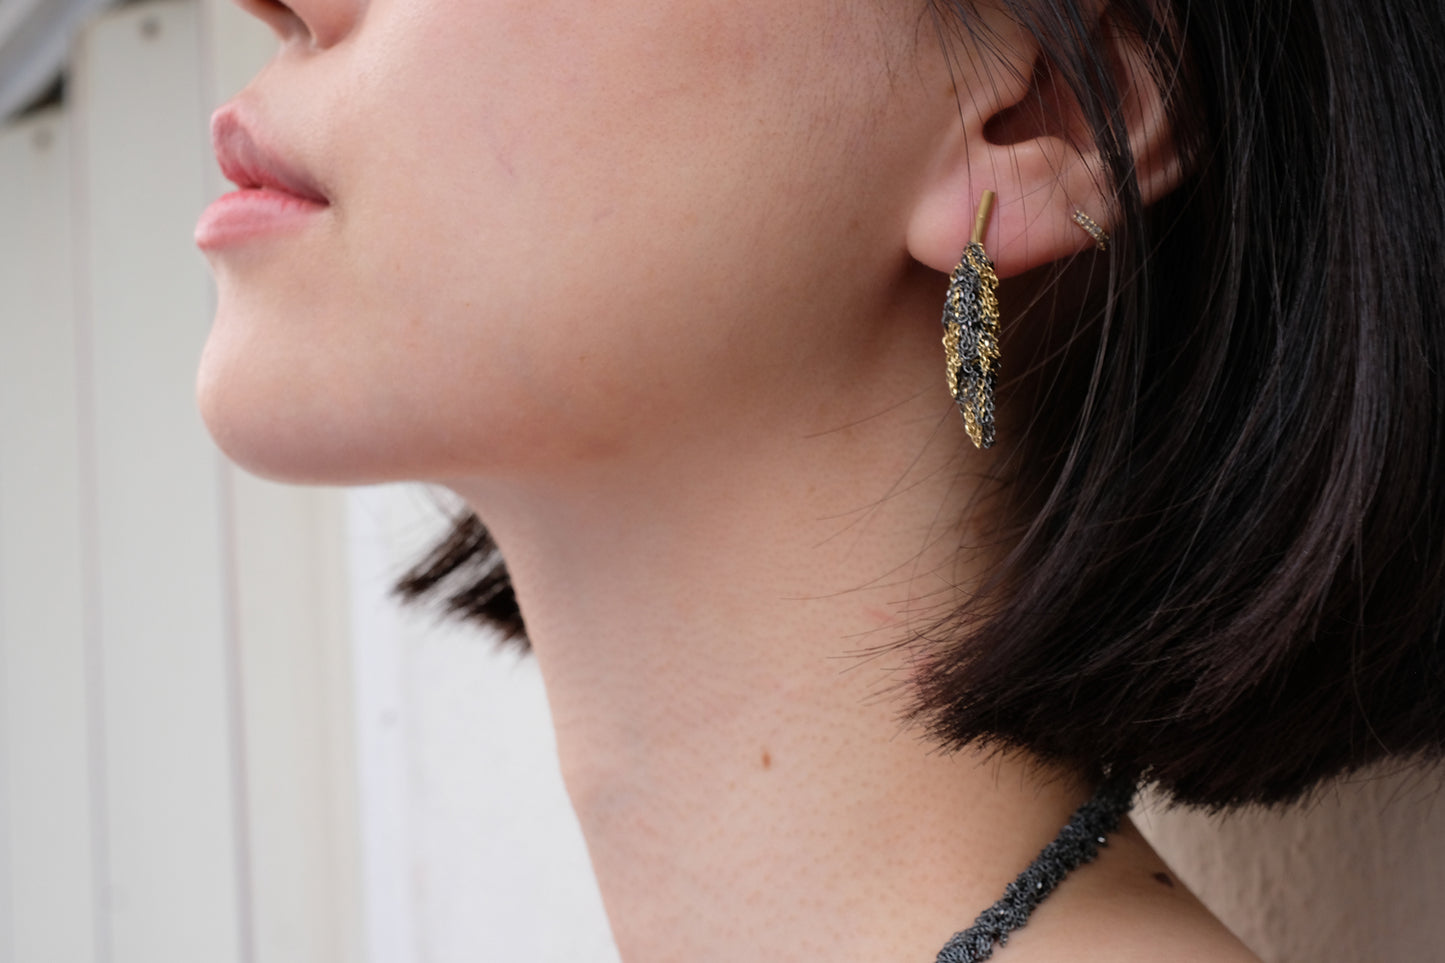 Oxidised and Gold-Plated Tangled Earrings